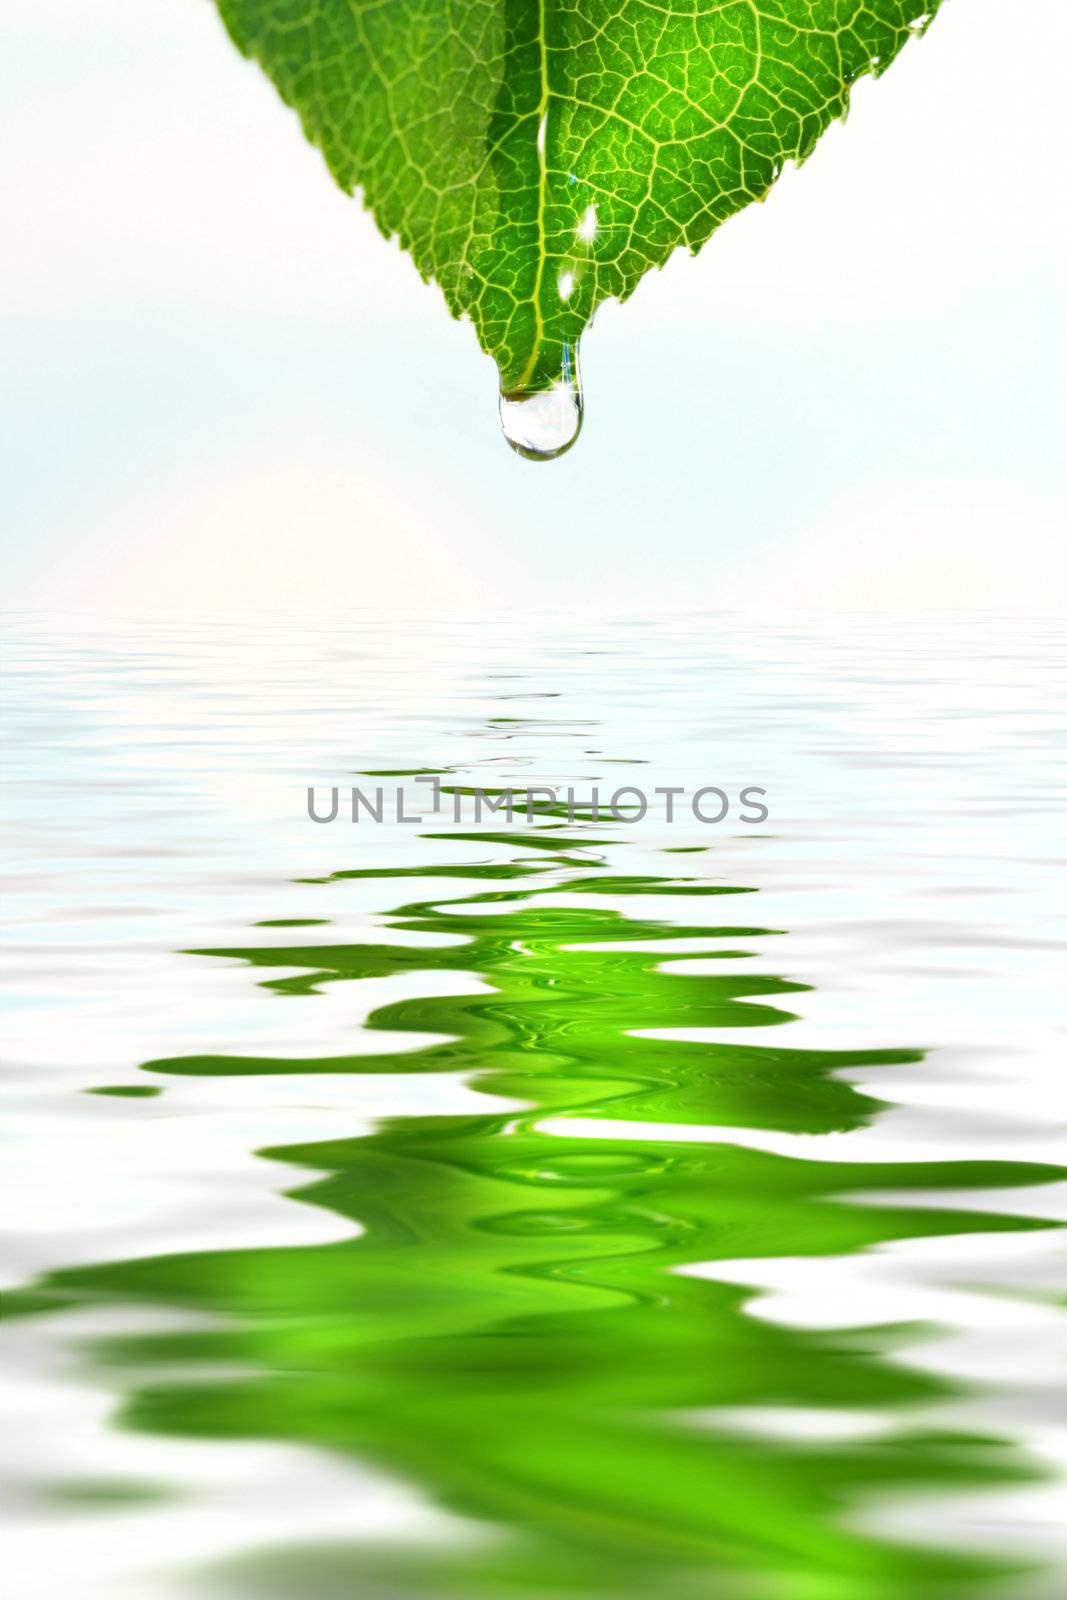 Green leaf with water droplet over water reflection